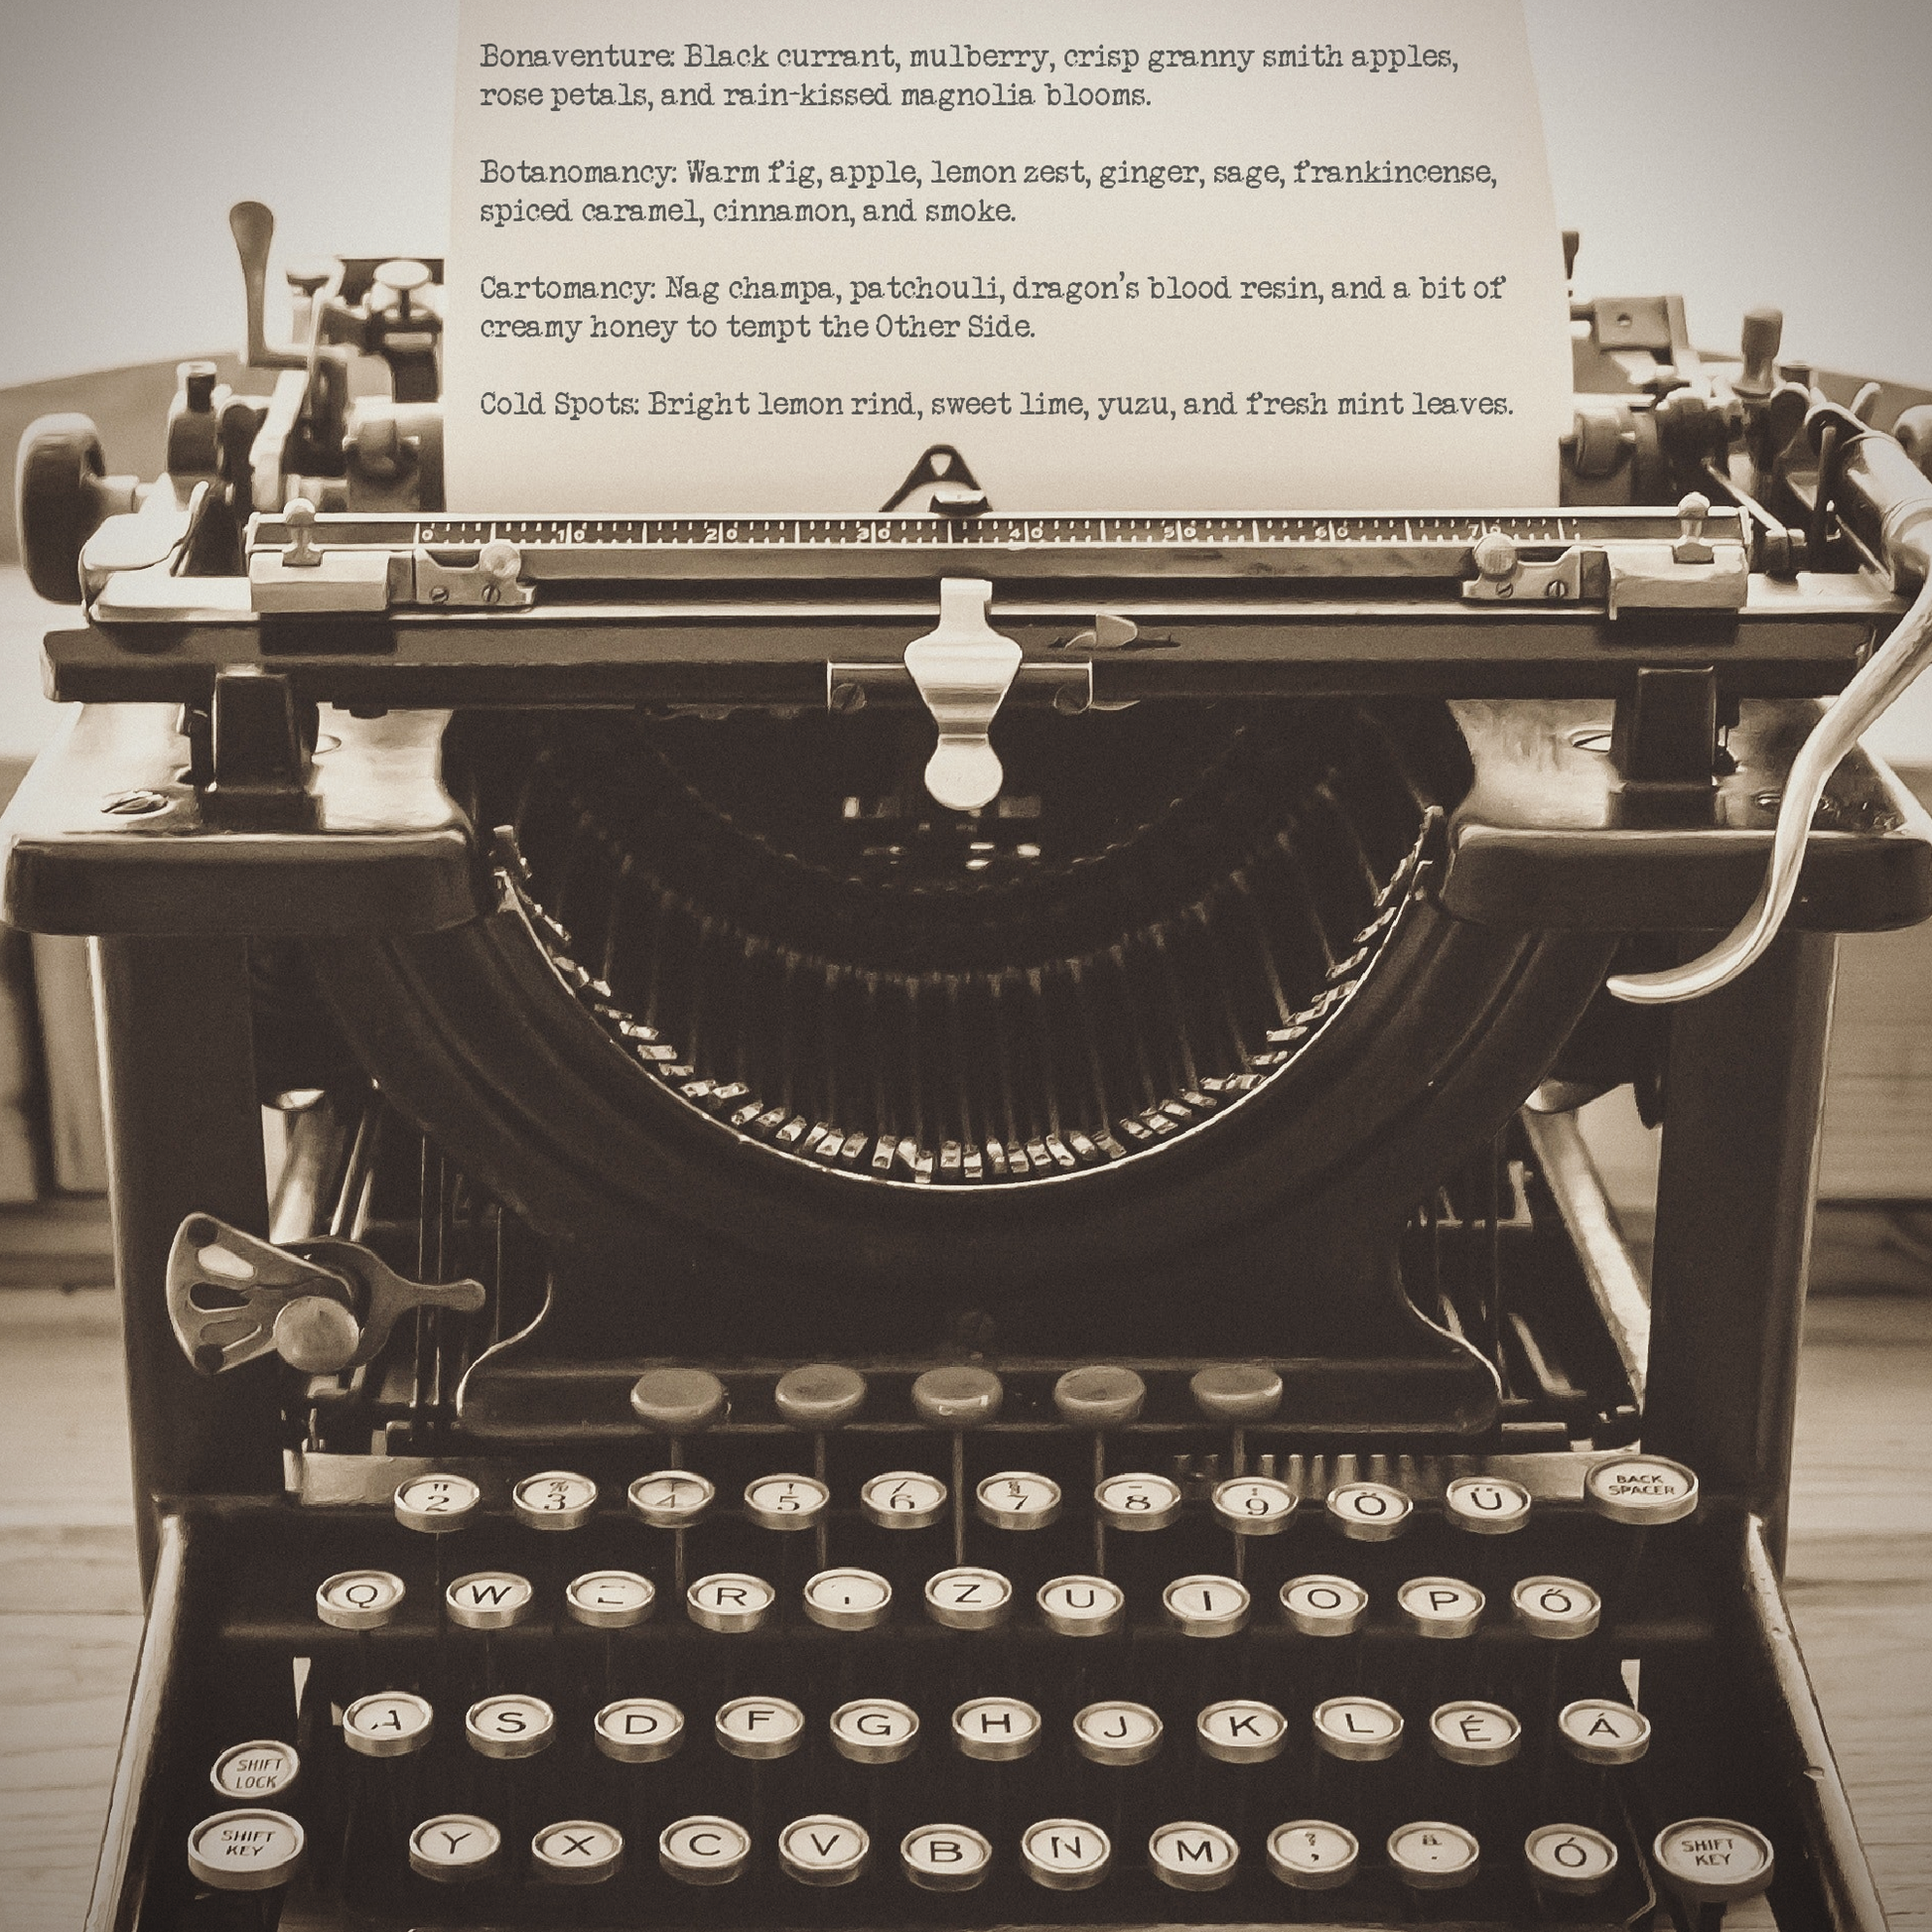 An antique typewriter with a piece of paper bearing several Little and Grim scent descriptions.